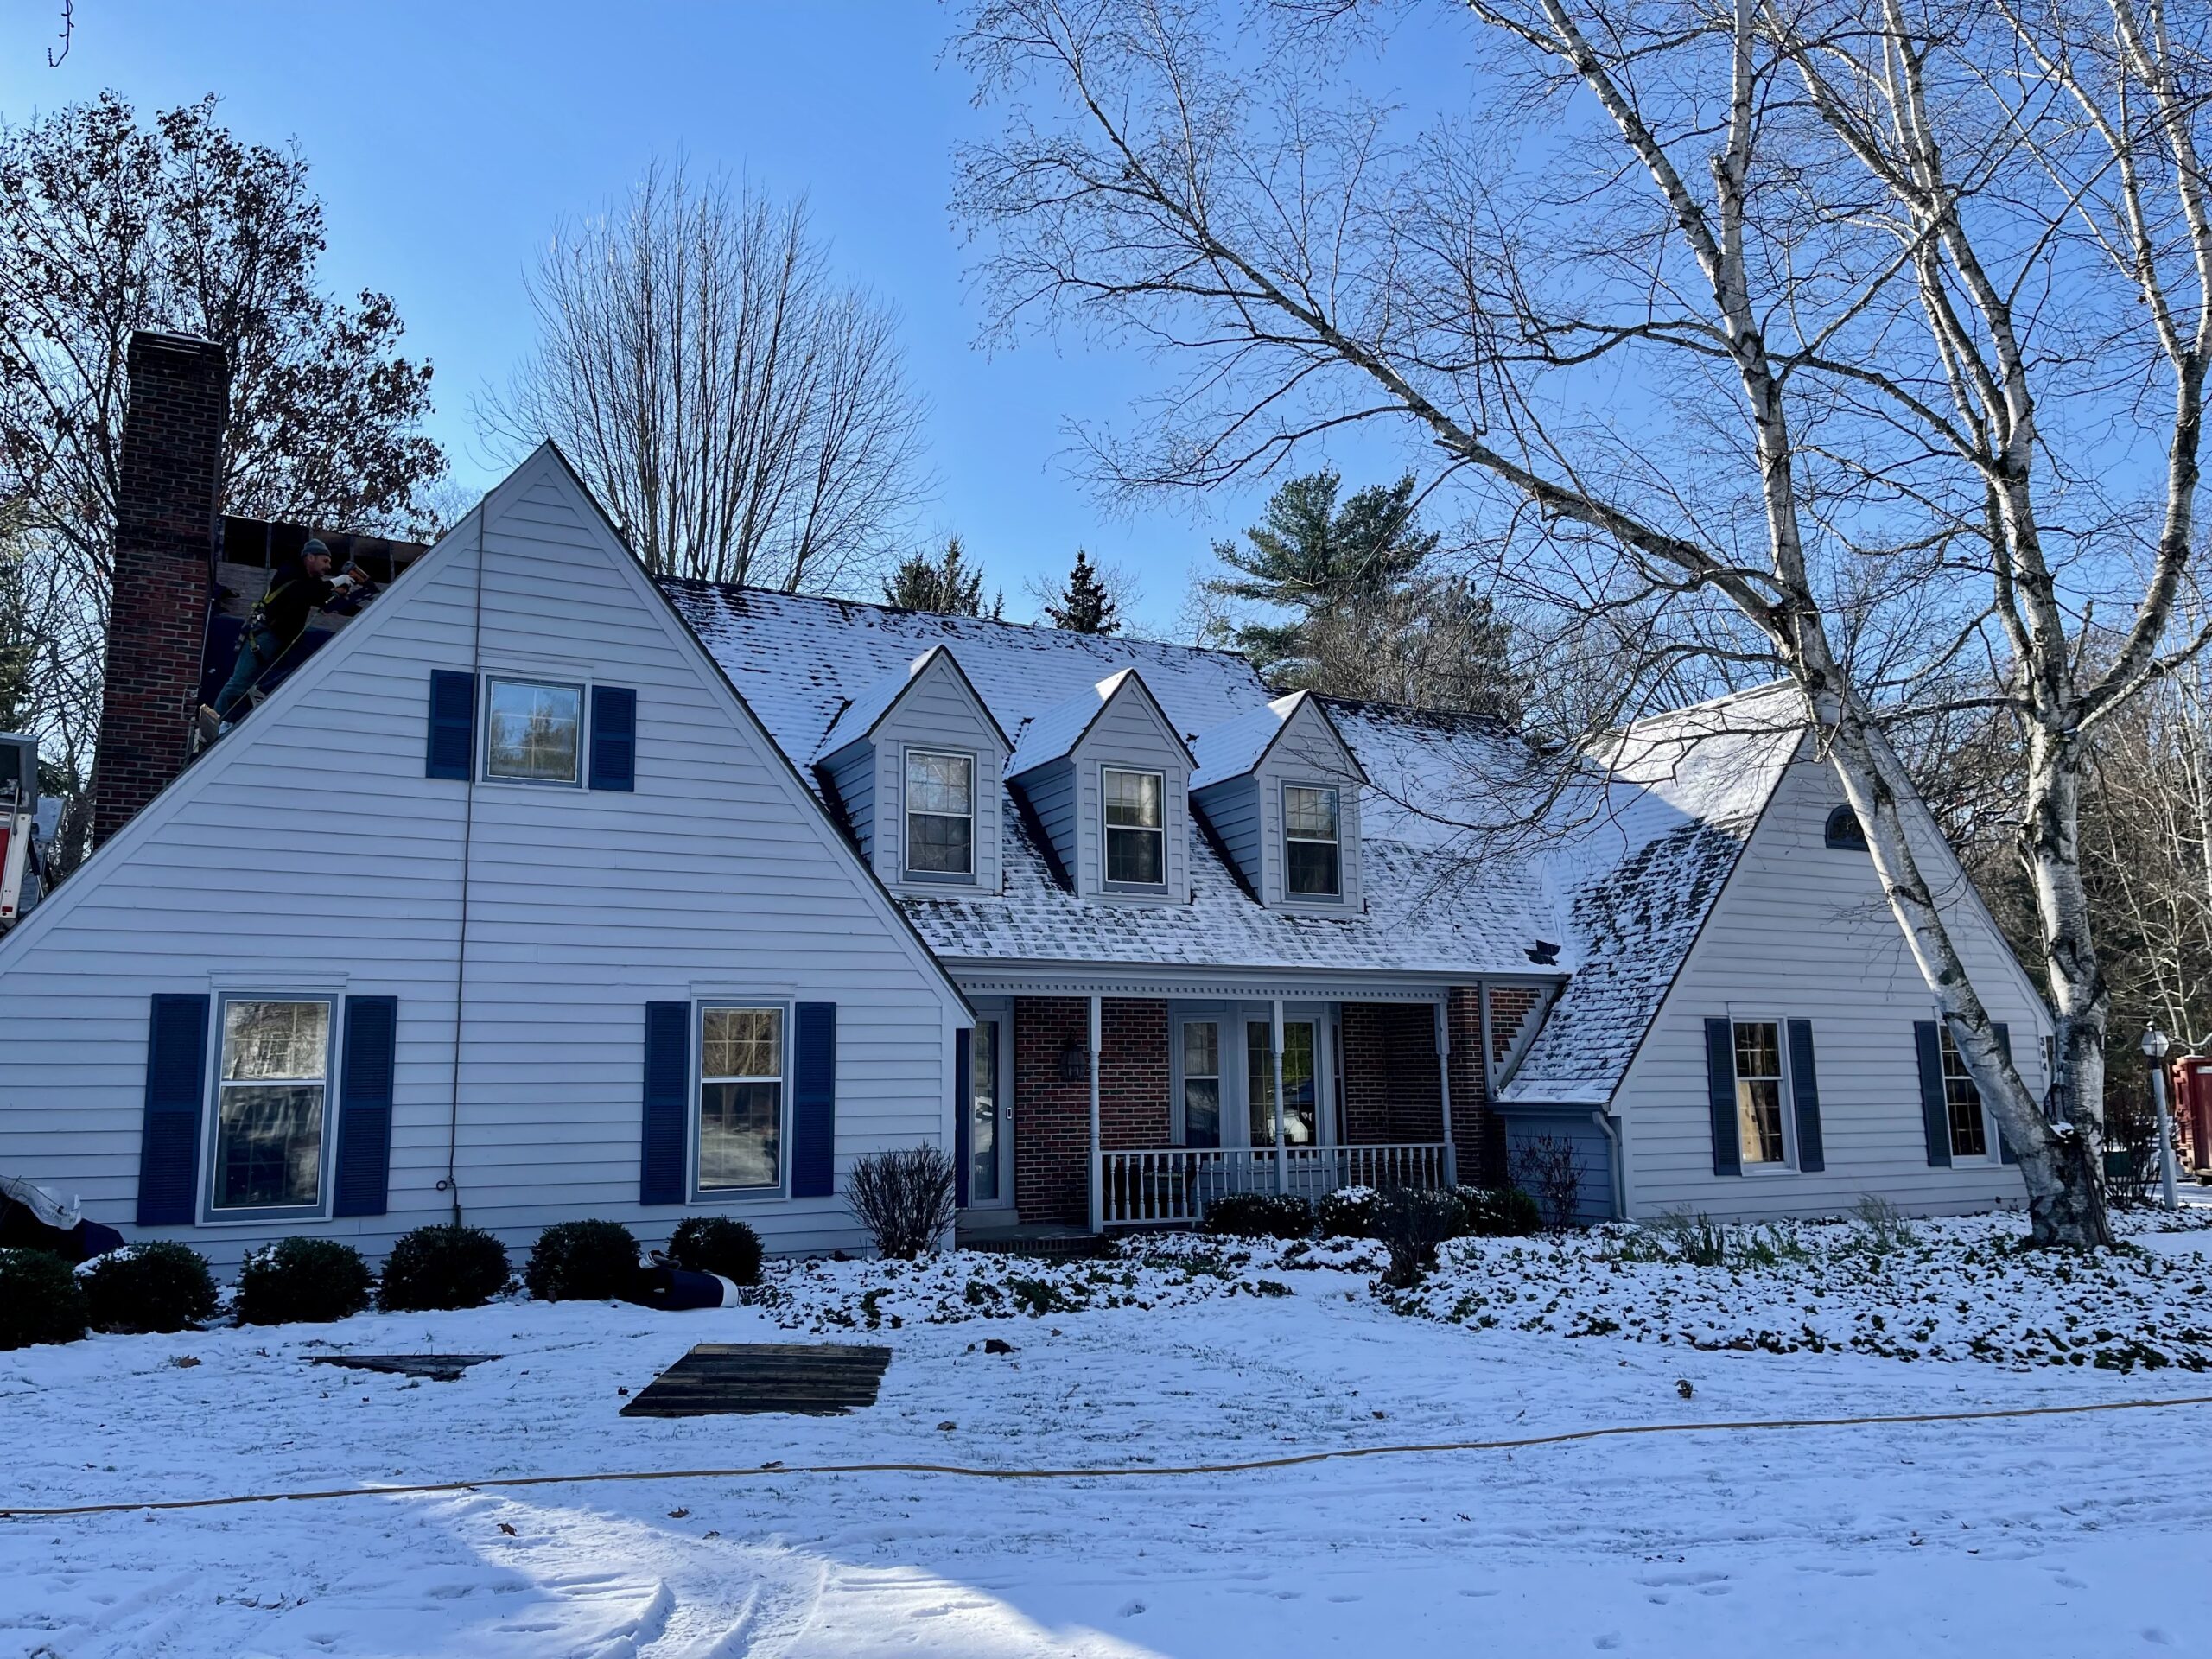 L.H. Krueger and Son finished re-roofing this home in Delafield, WI